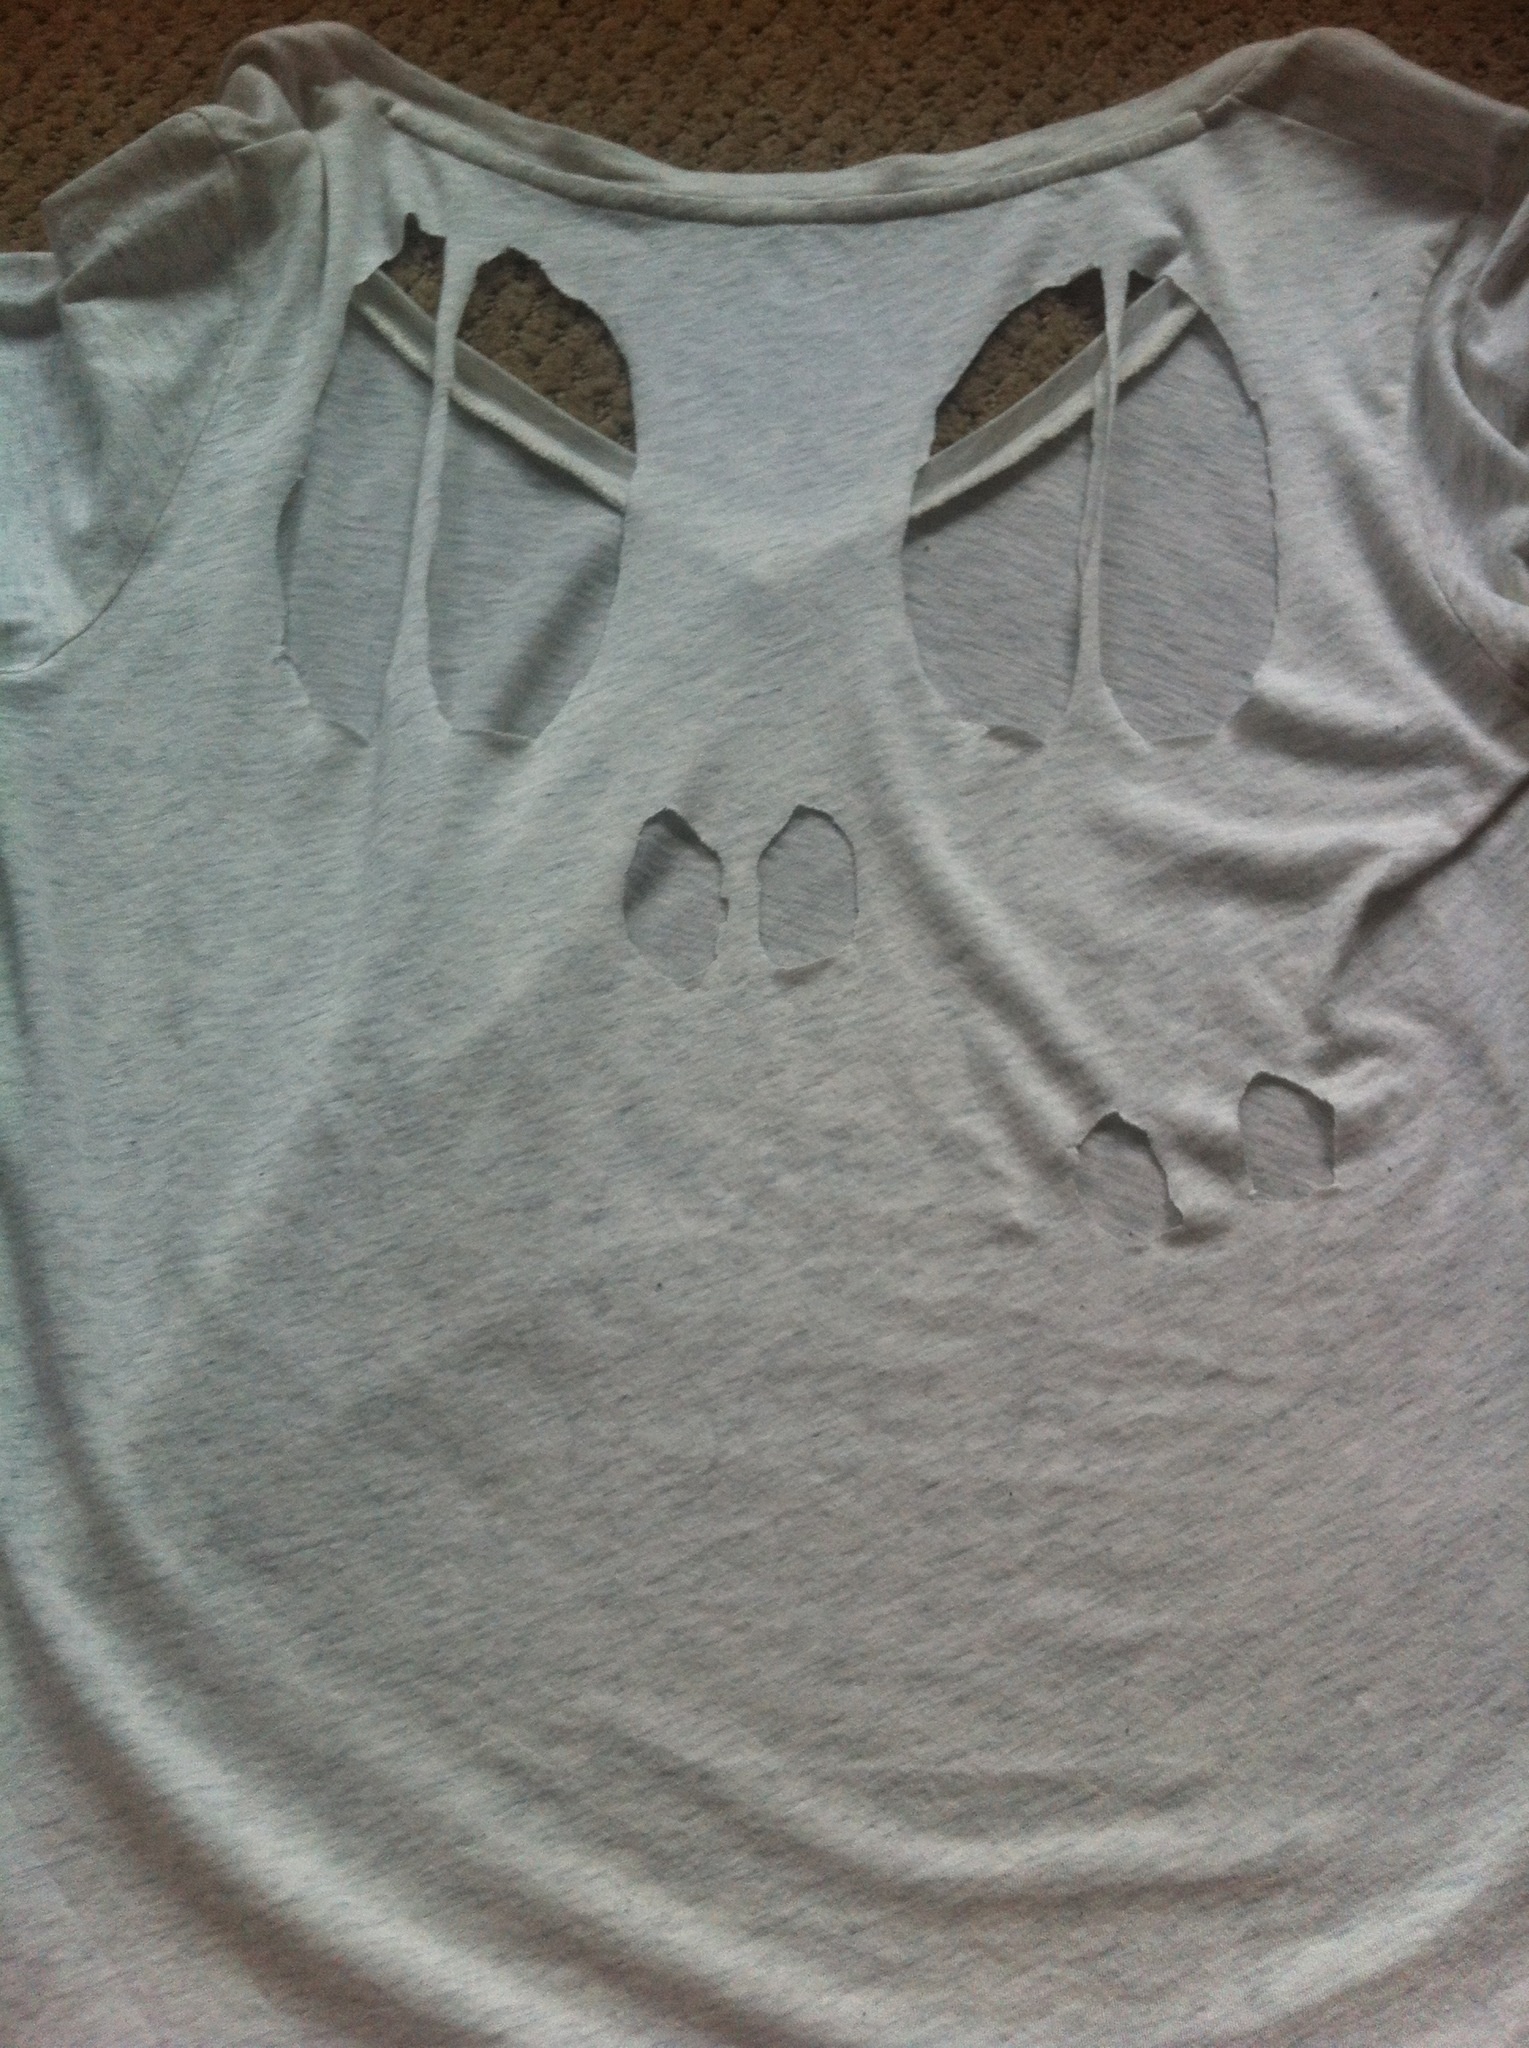 Skull Cutout T-shirt (with Pictures) - Instructables